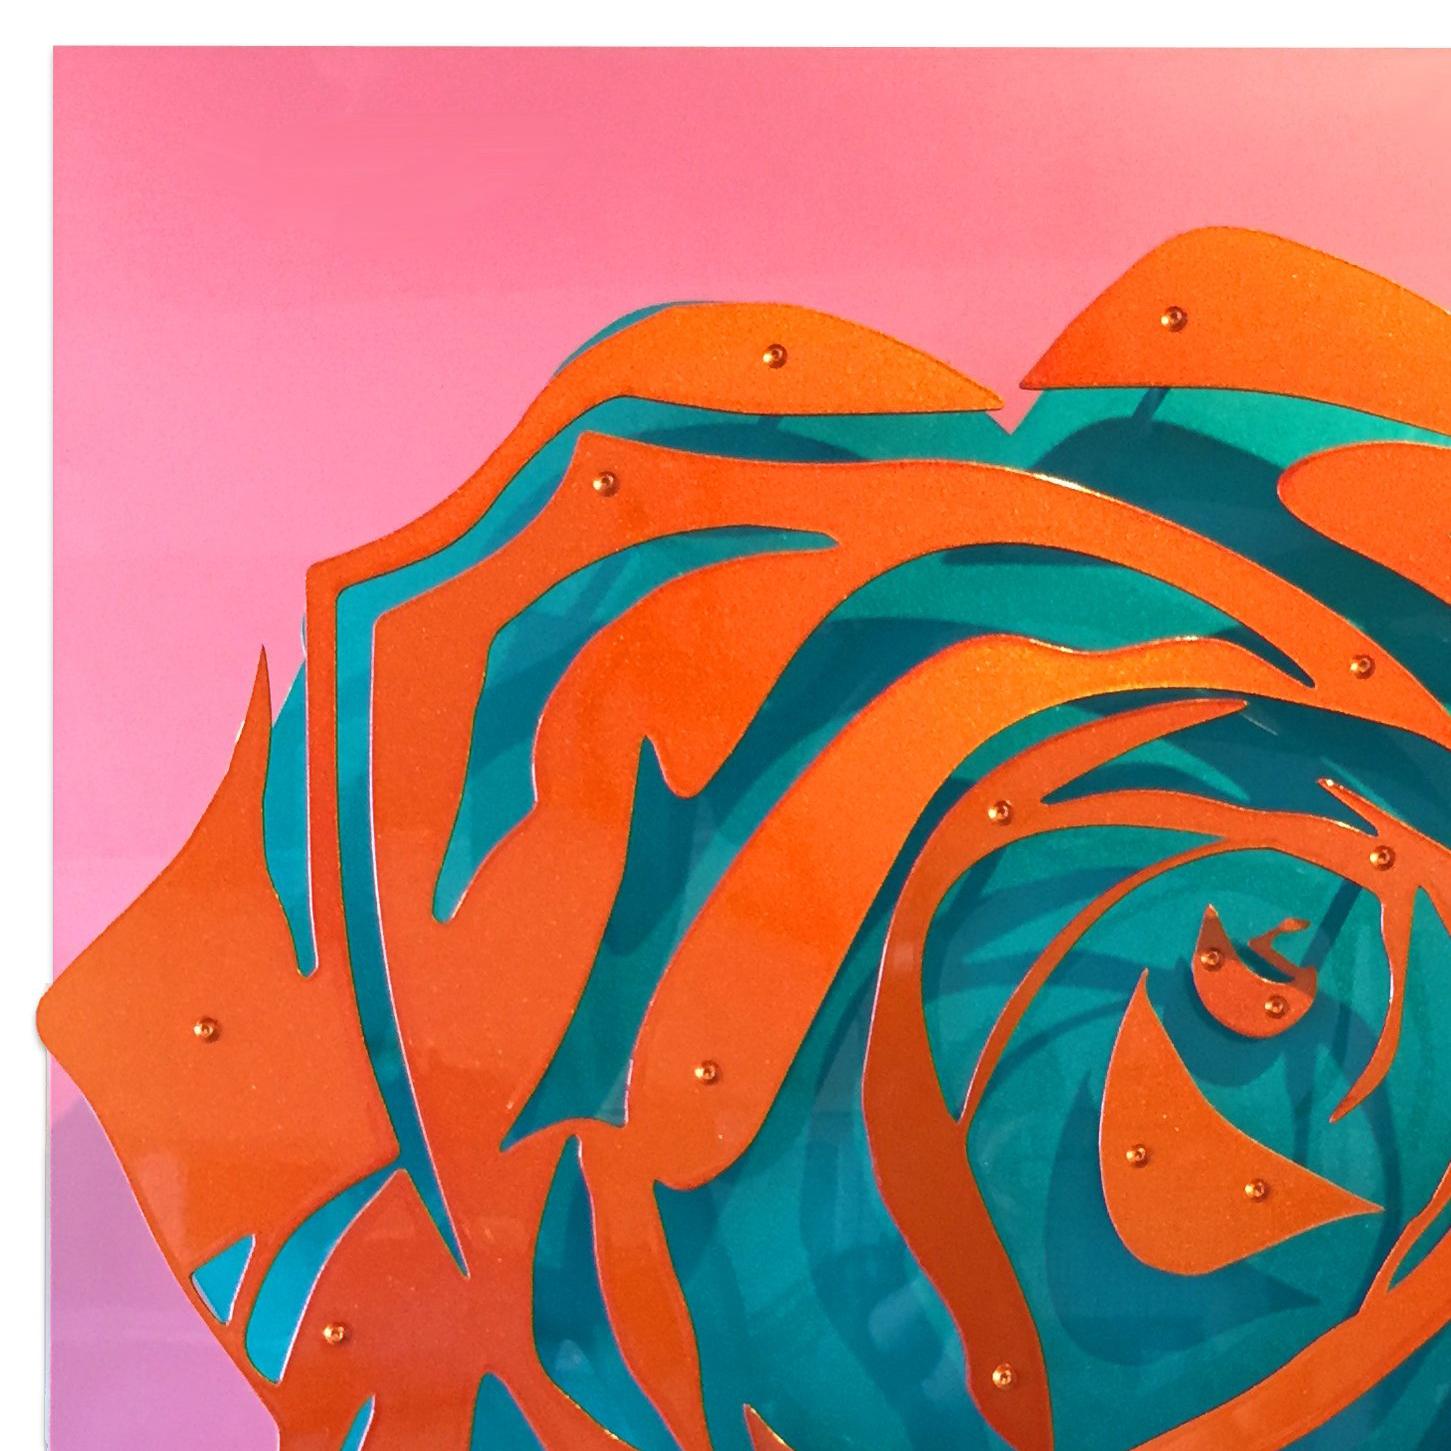 Candy Rose - Orange on Pink - Abstract Sculpture by Michael Kalish